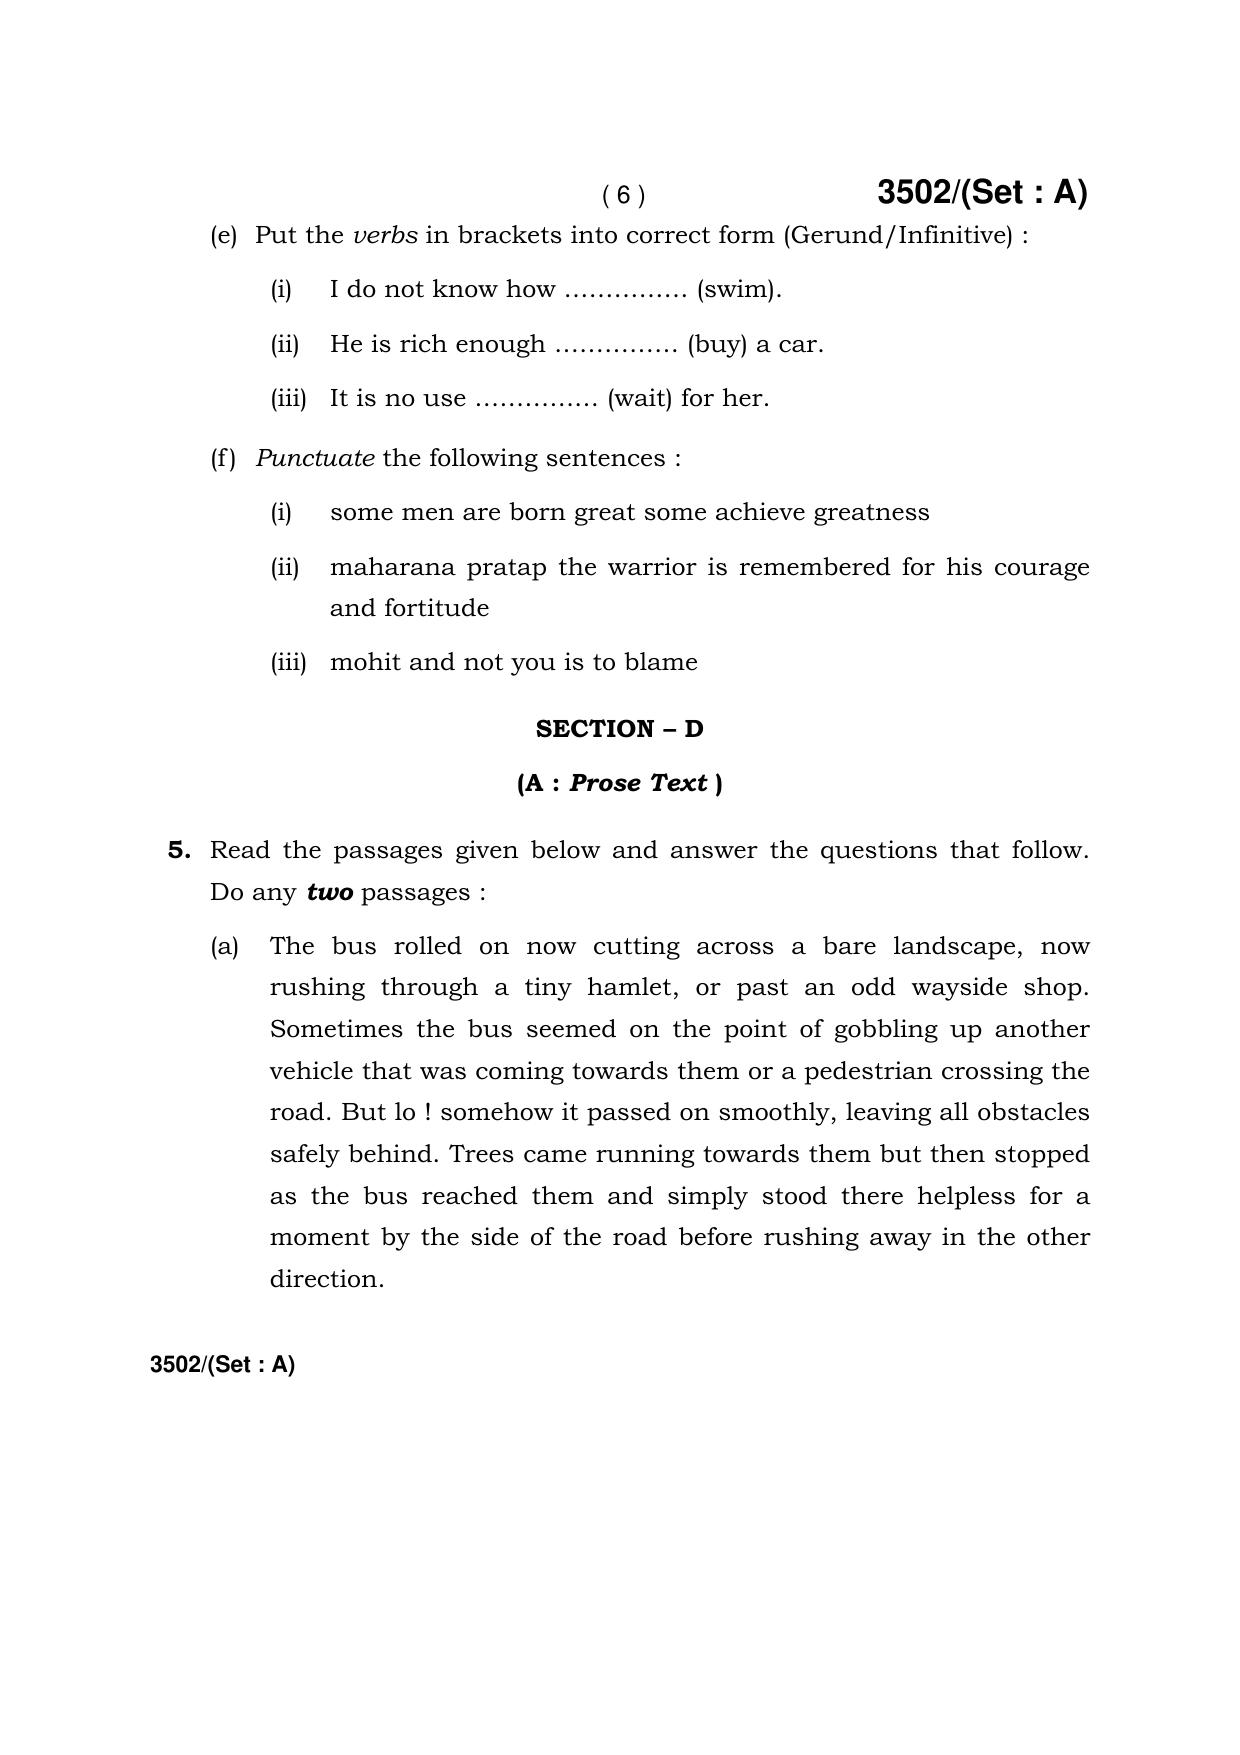 Haryana Board HBSE Class 10 English -A 2018 Question Paper - Page 6